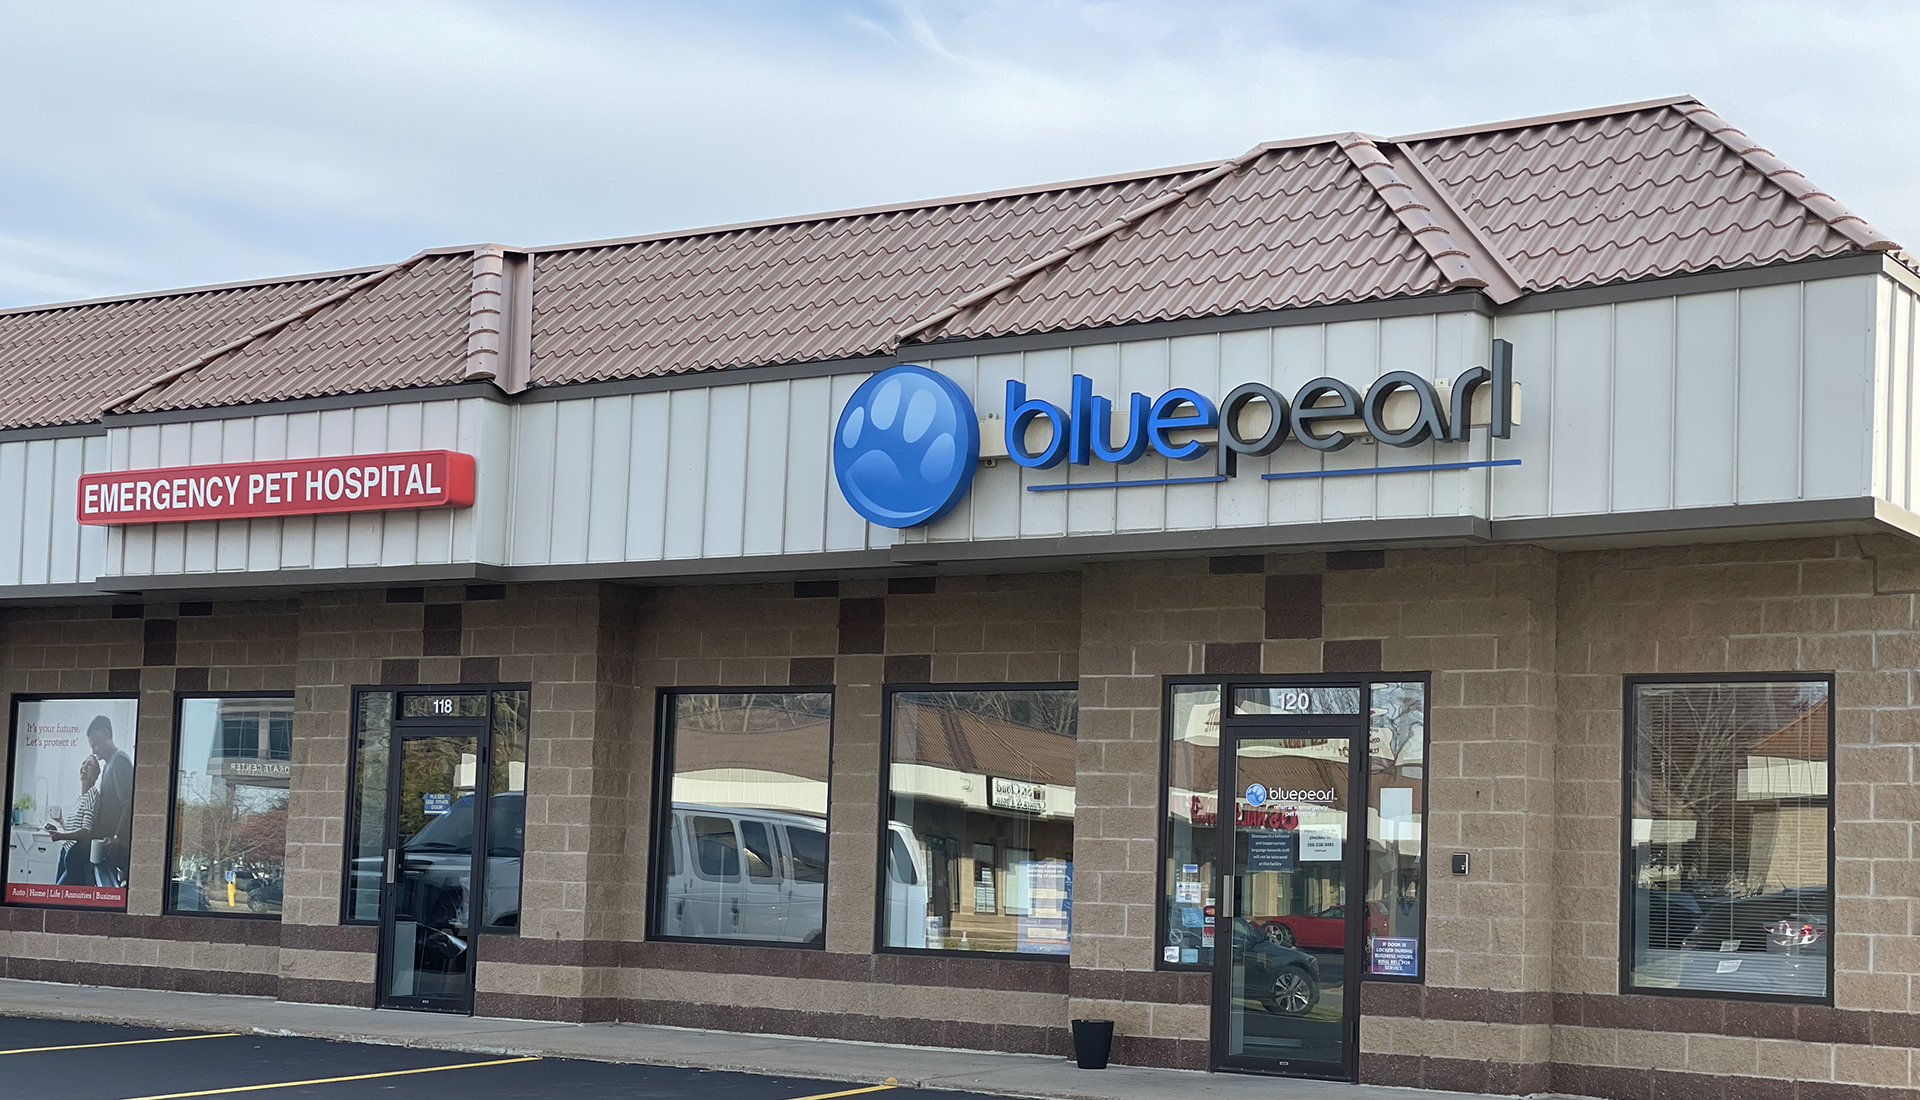 An exterior view of the BluePearl Pet Hospital in St. Cloud, MN.